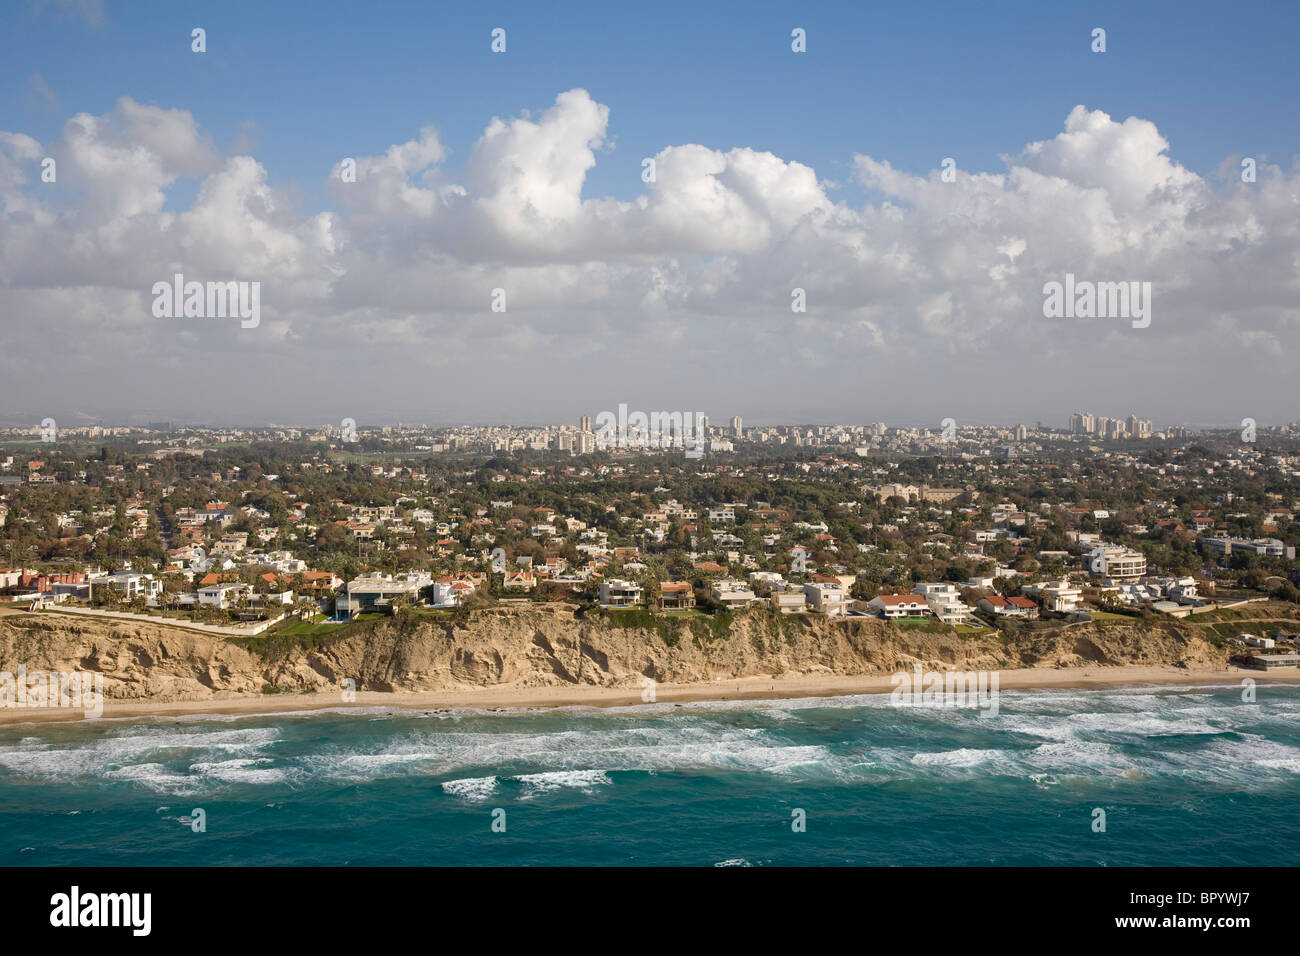 Aerial photograph of the city of Herzliyah Stock Photo